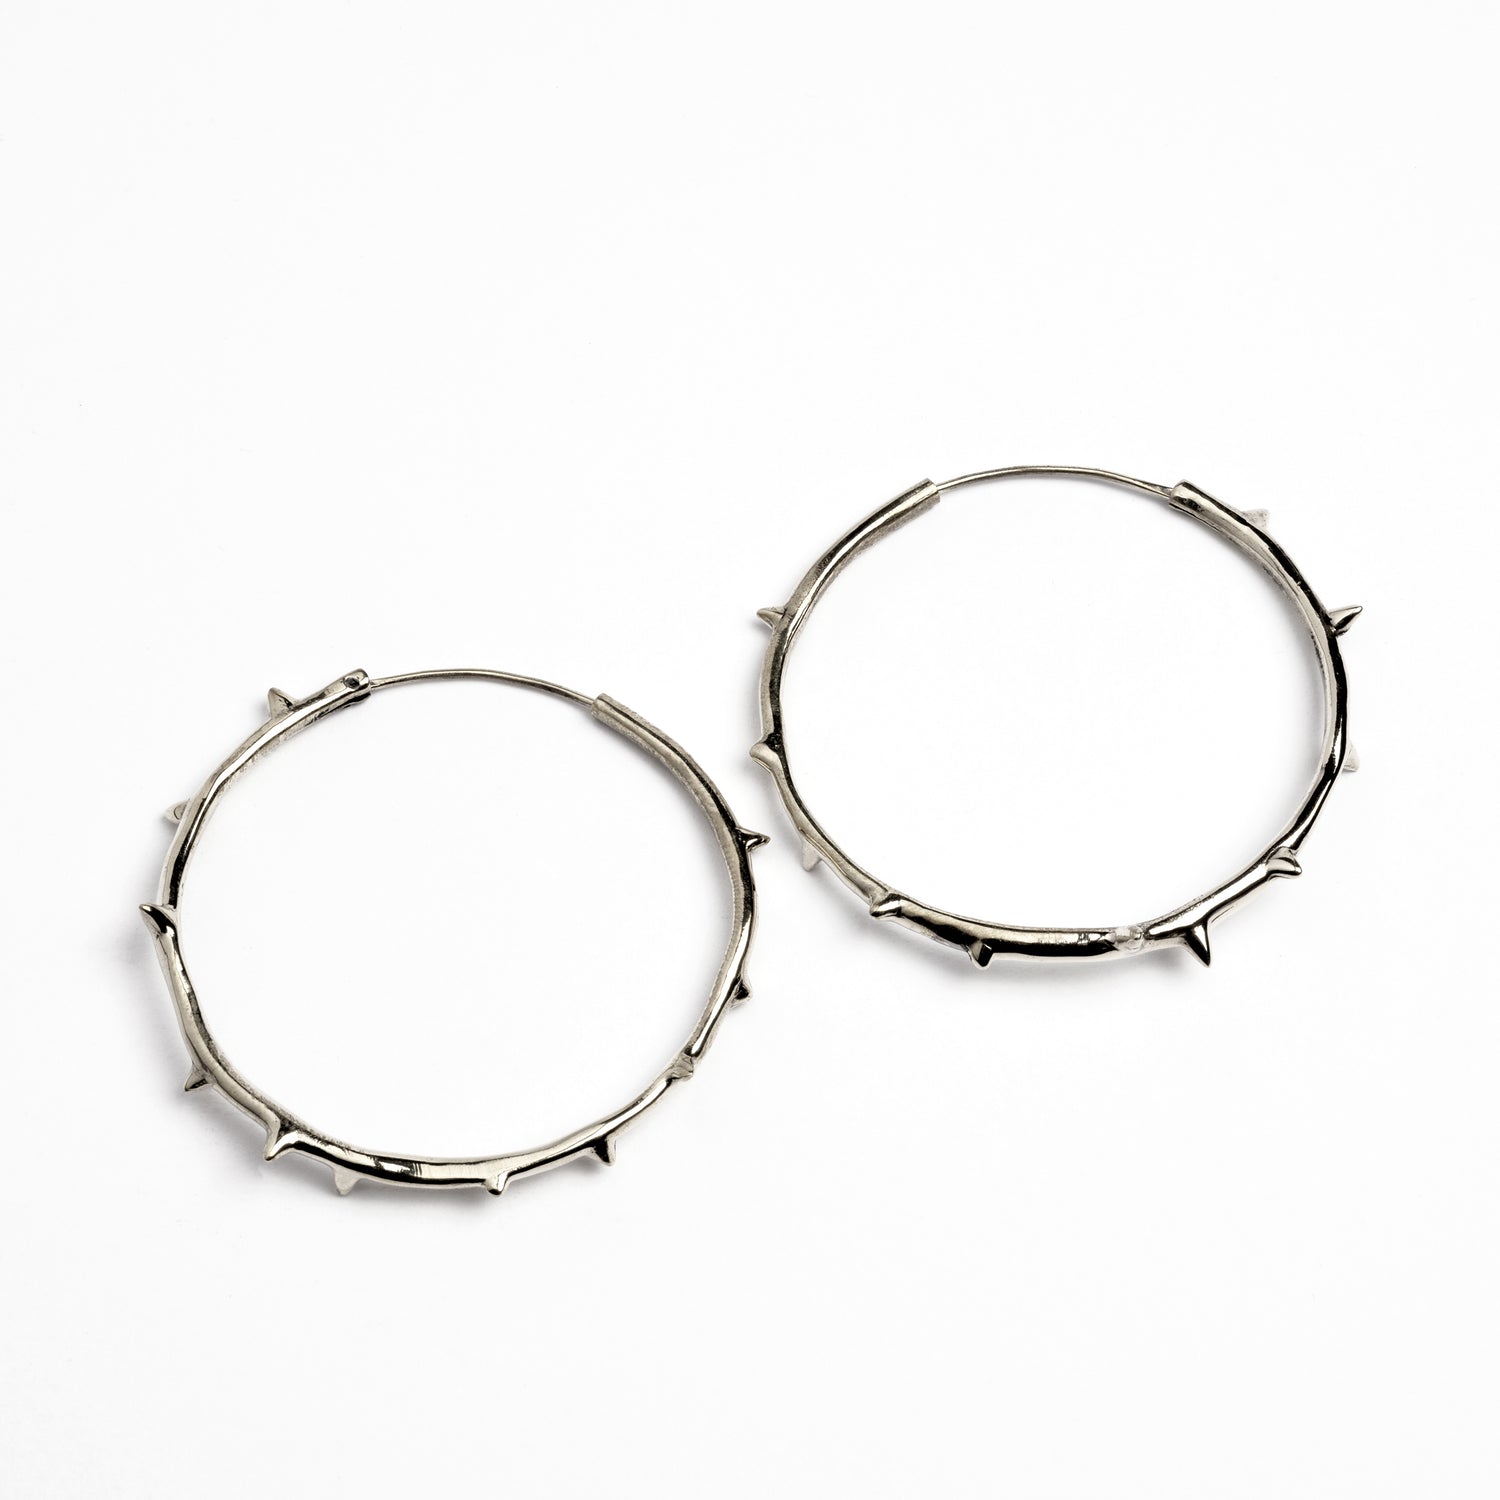 Gothic style Thorn Hoops Earrings frontal view